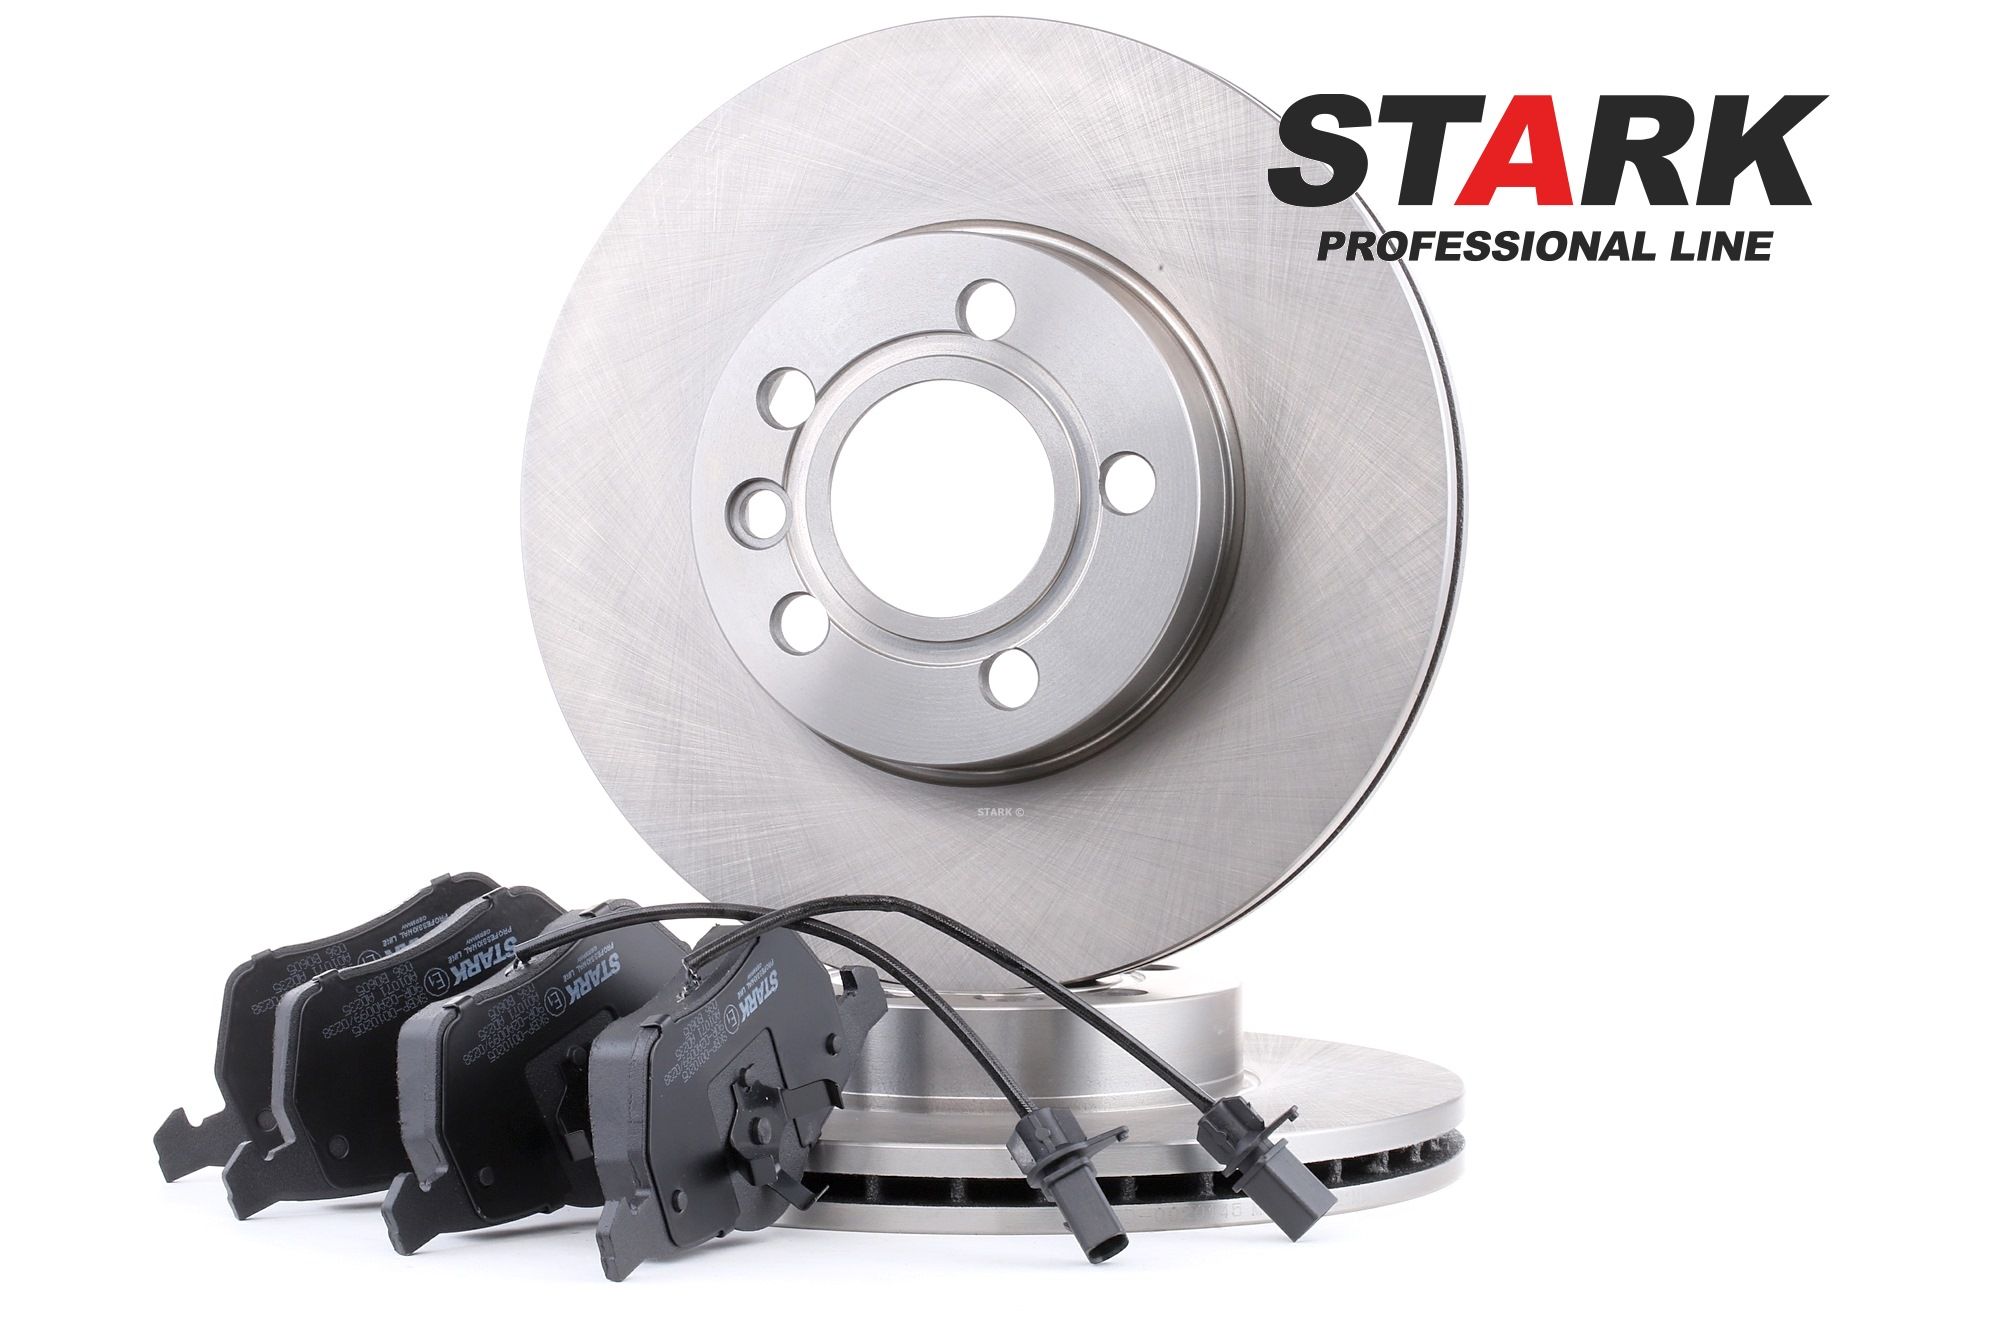 STARK SKBK-1090025 Brake discs and pads set Front Axle, Vented, with integrated wear sensor